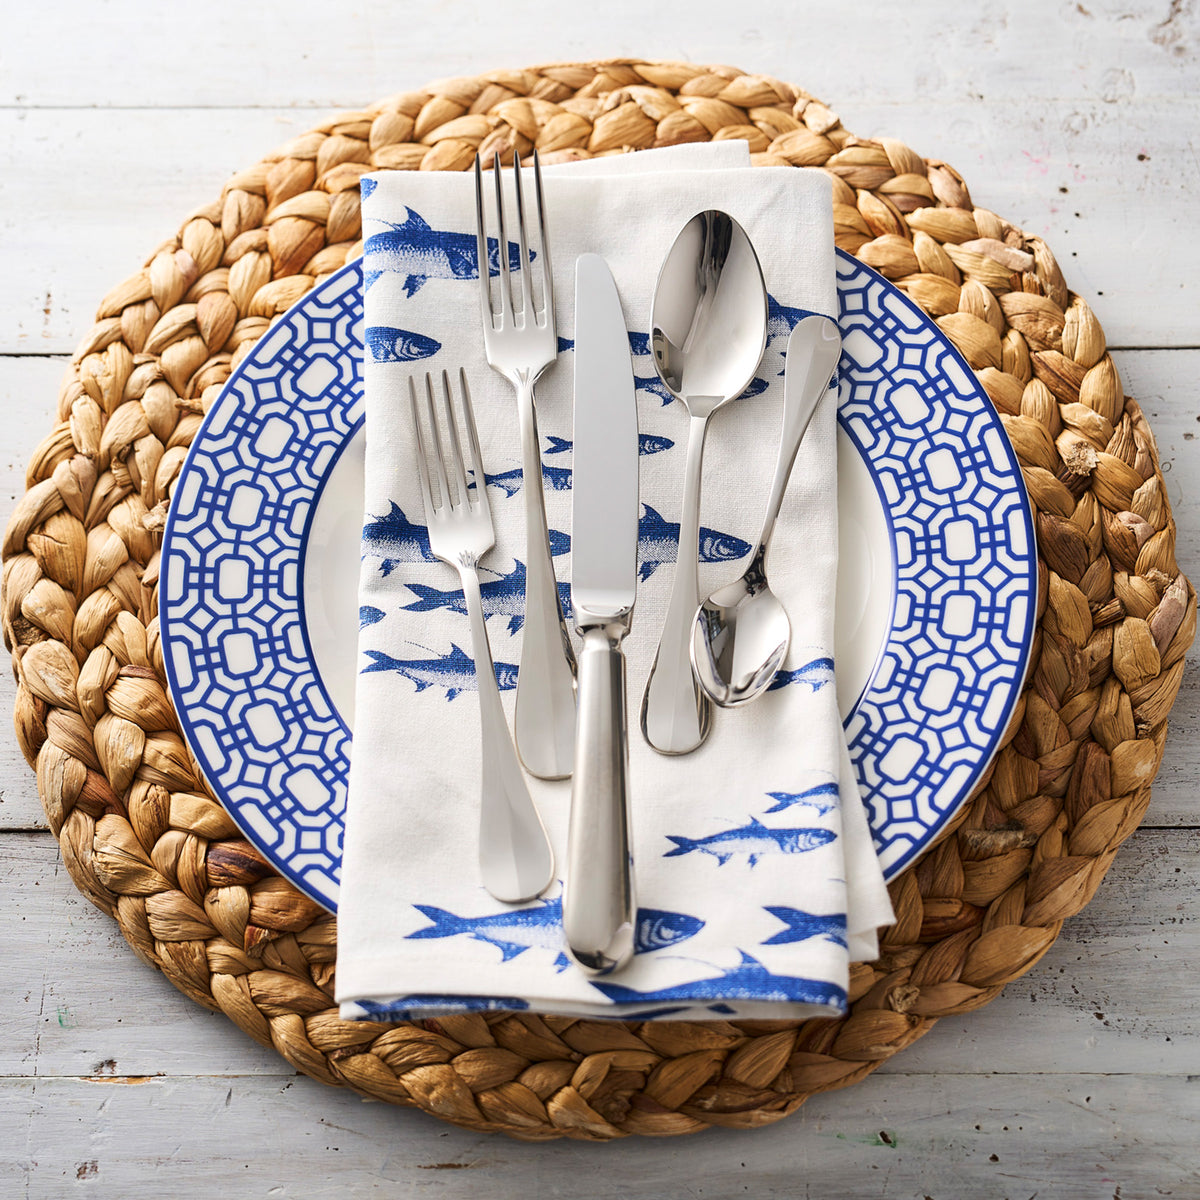 A woven placemat with a Caskata Artisanal Home Newport Garden Gate Rimmed Dinner Plate, a fish-patterned napkin, and silverware, including a knife, fork, and spoons, arranged neatly on a wooden surface - perfect for any coastal collections.